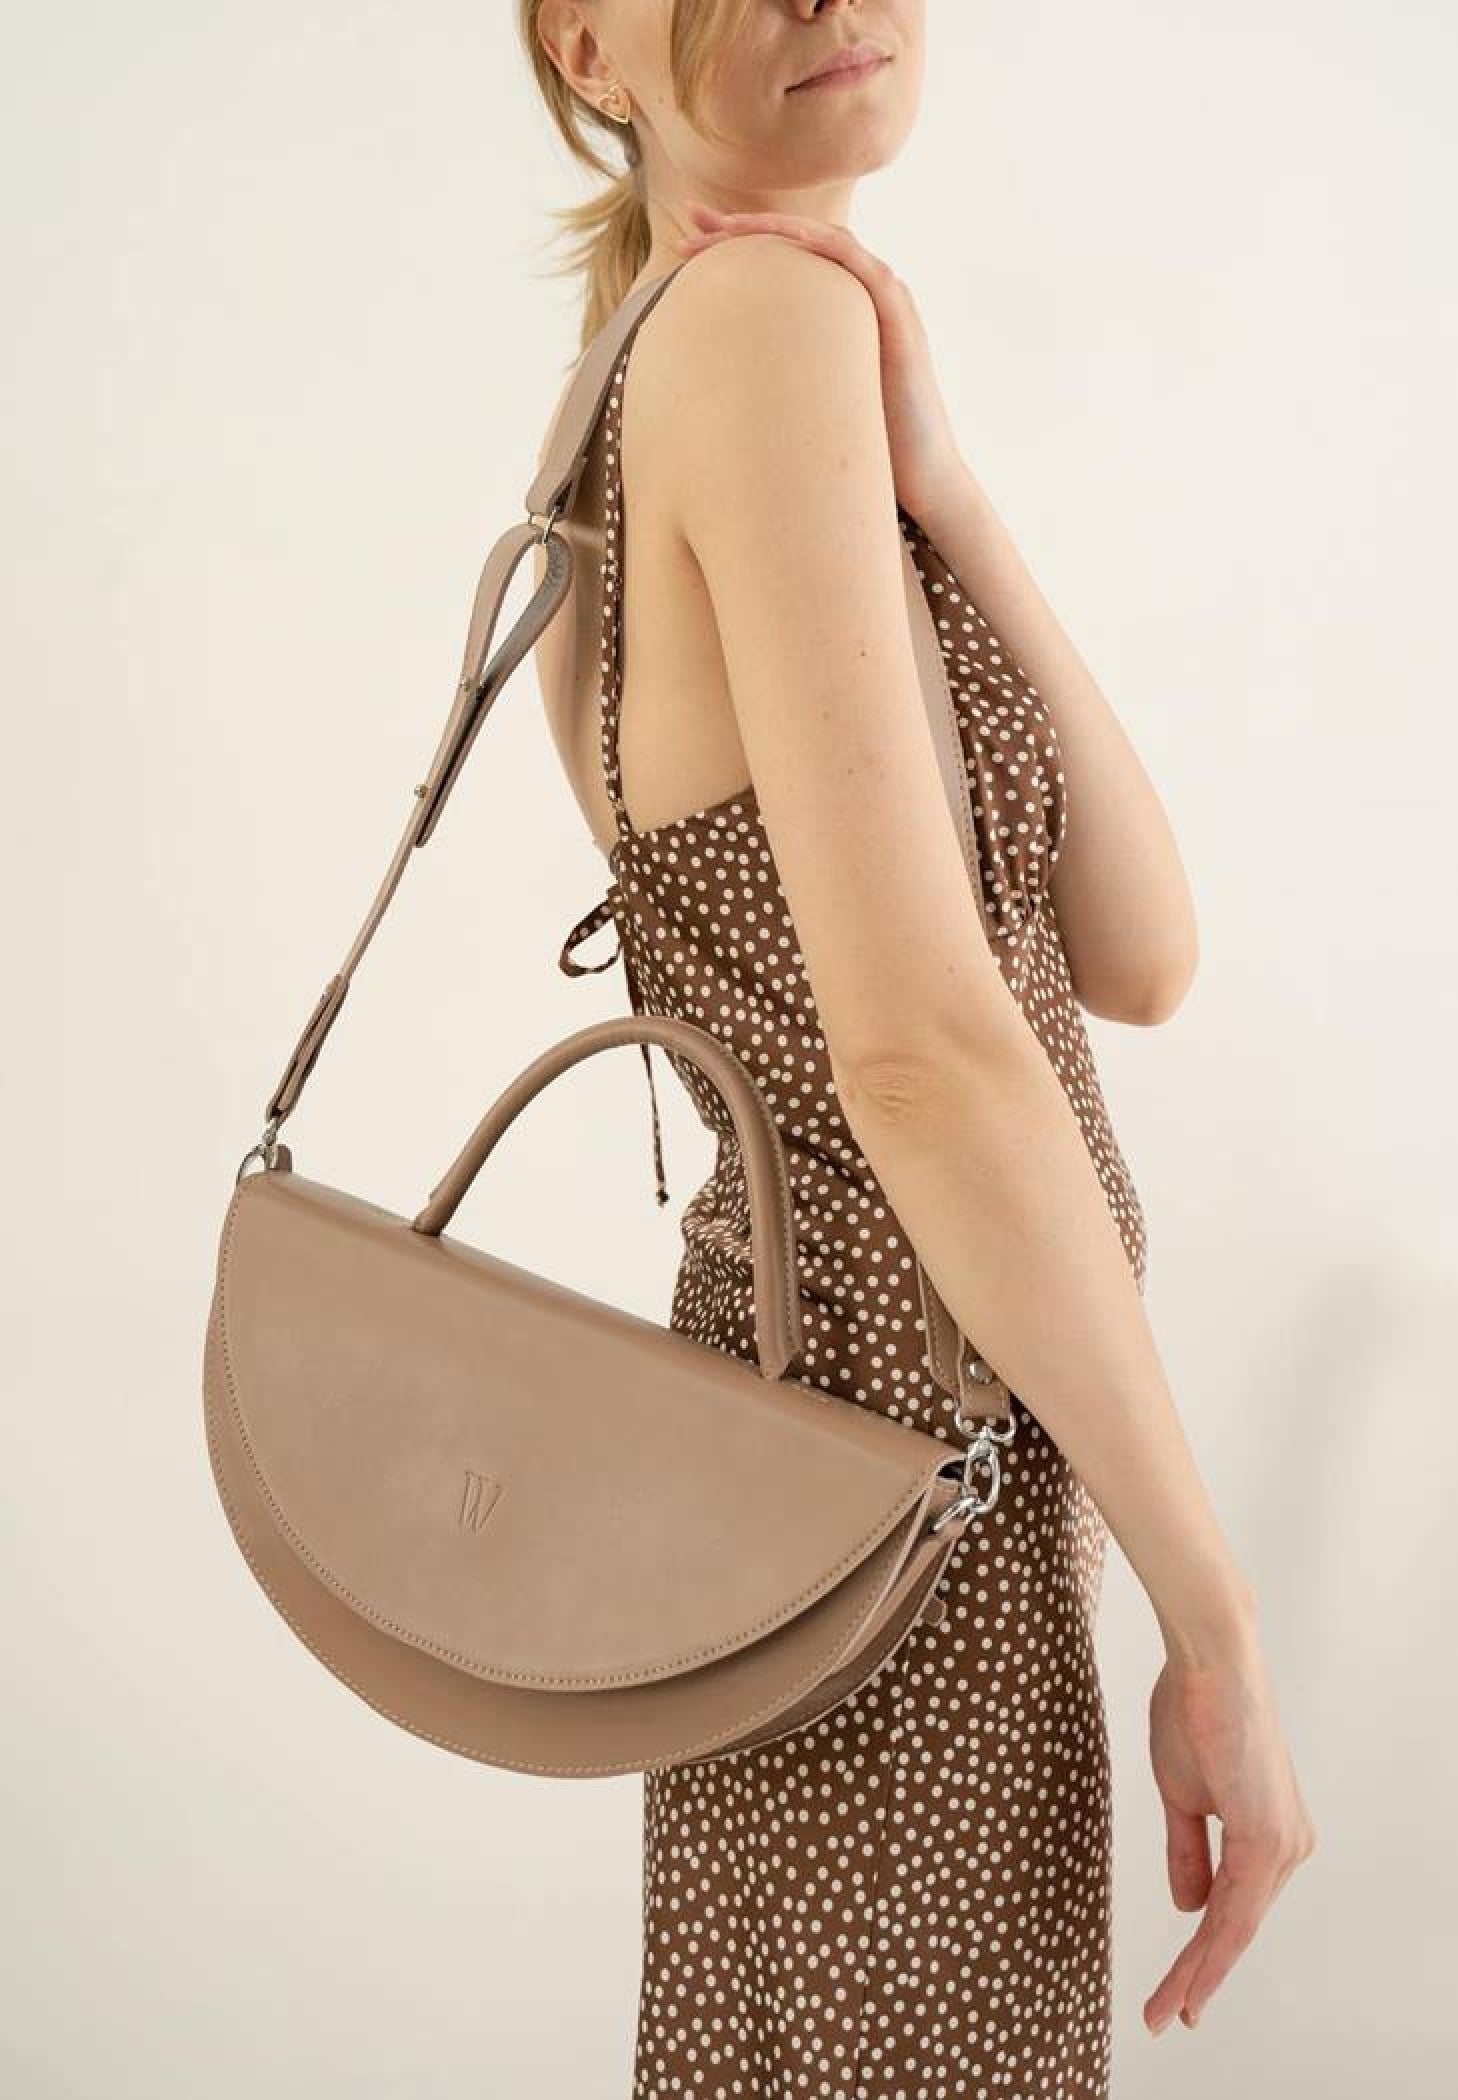 nude leather bag for women